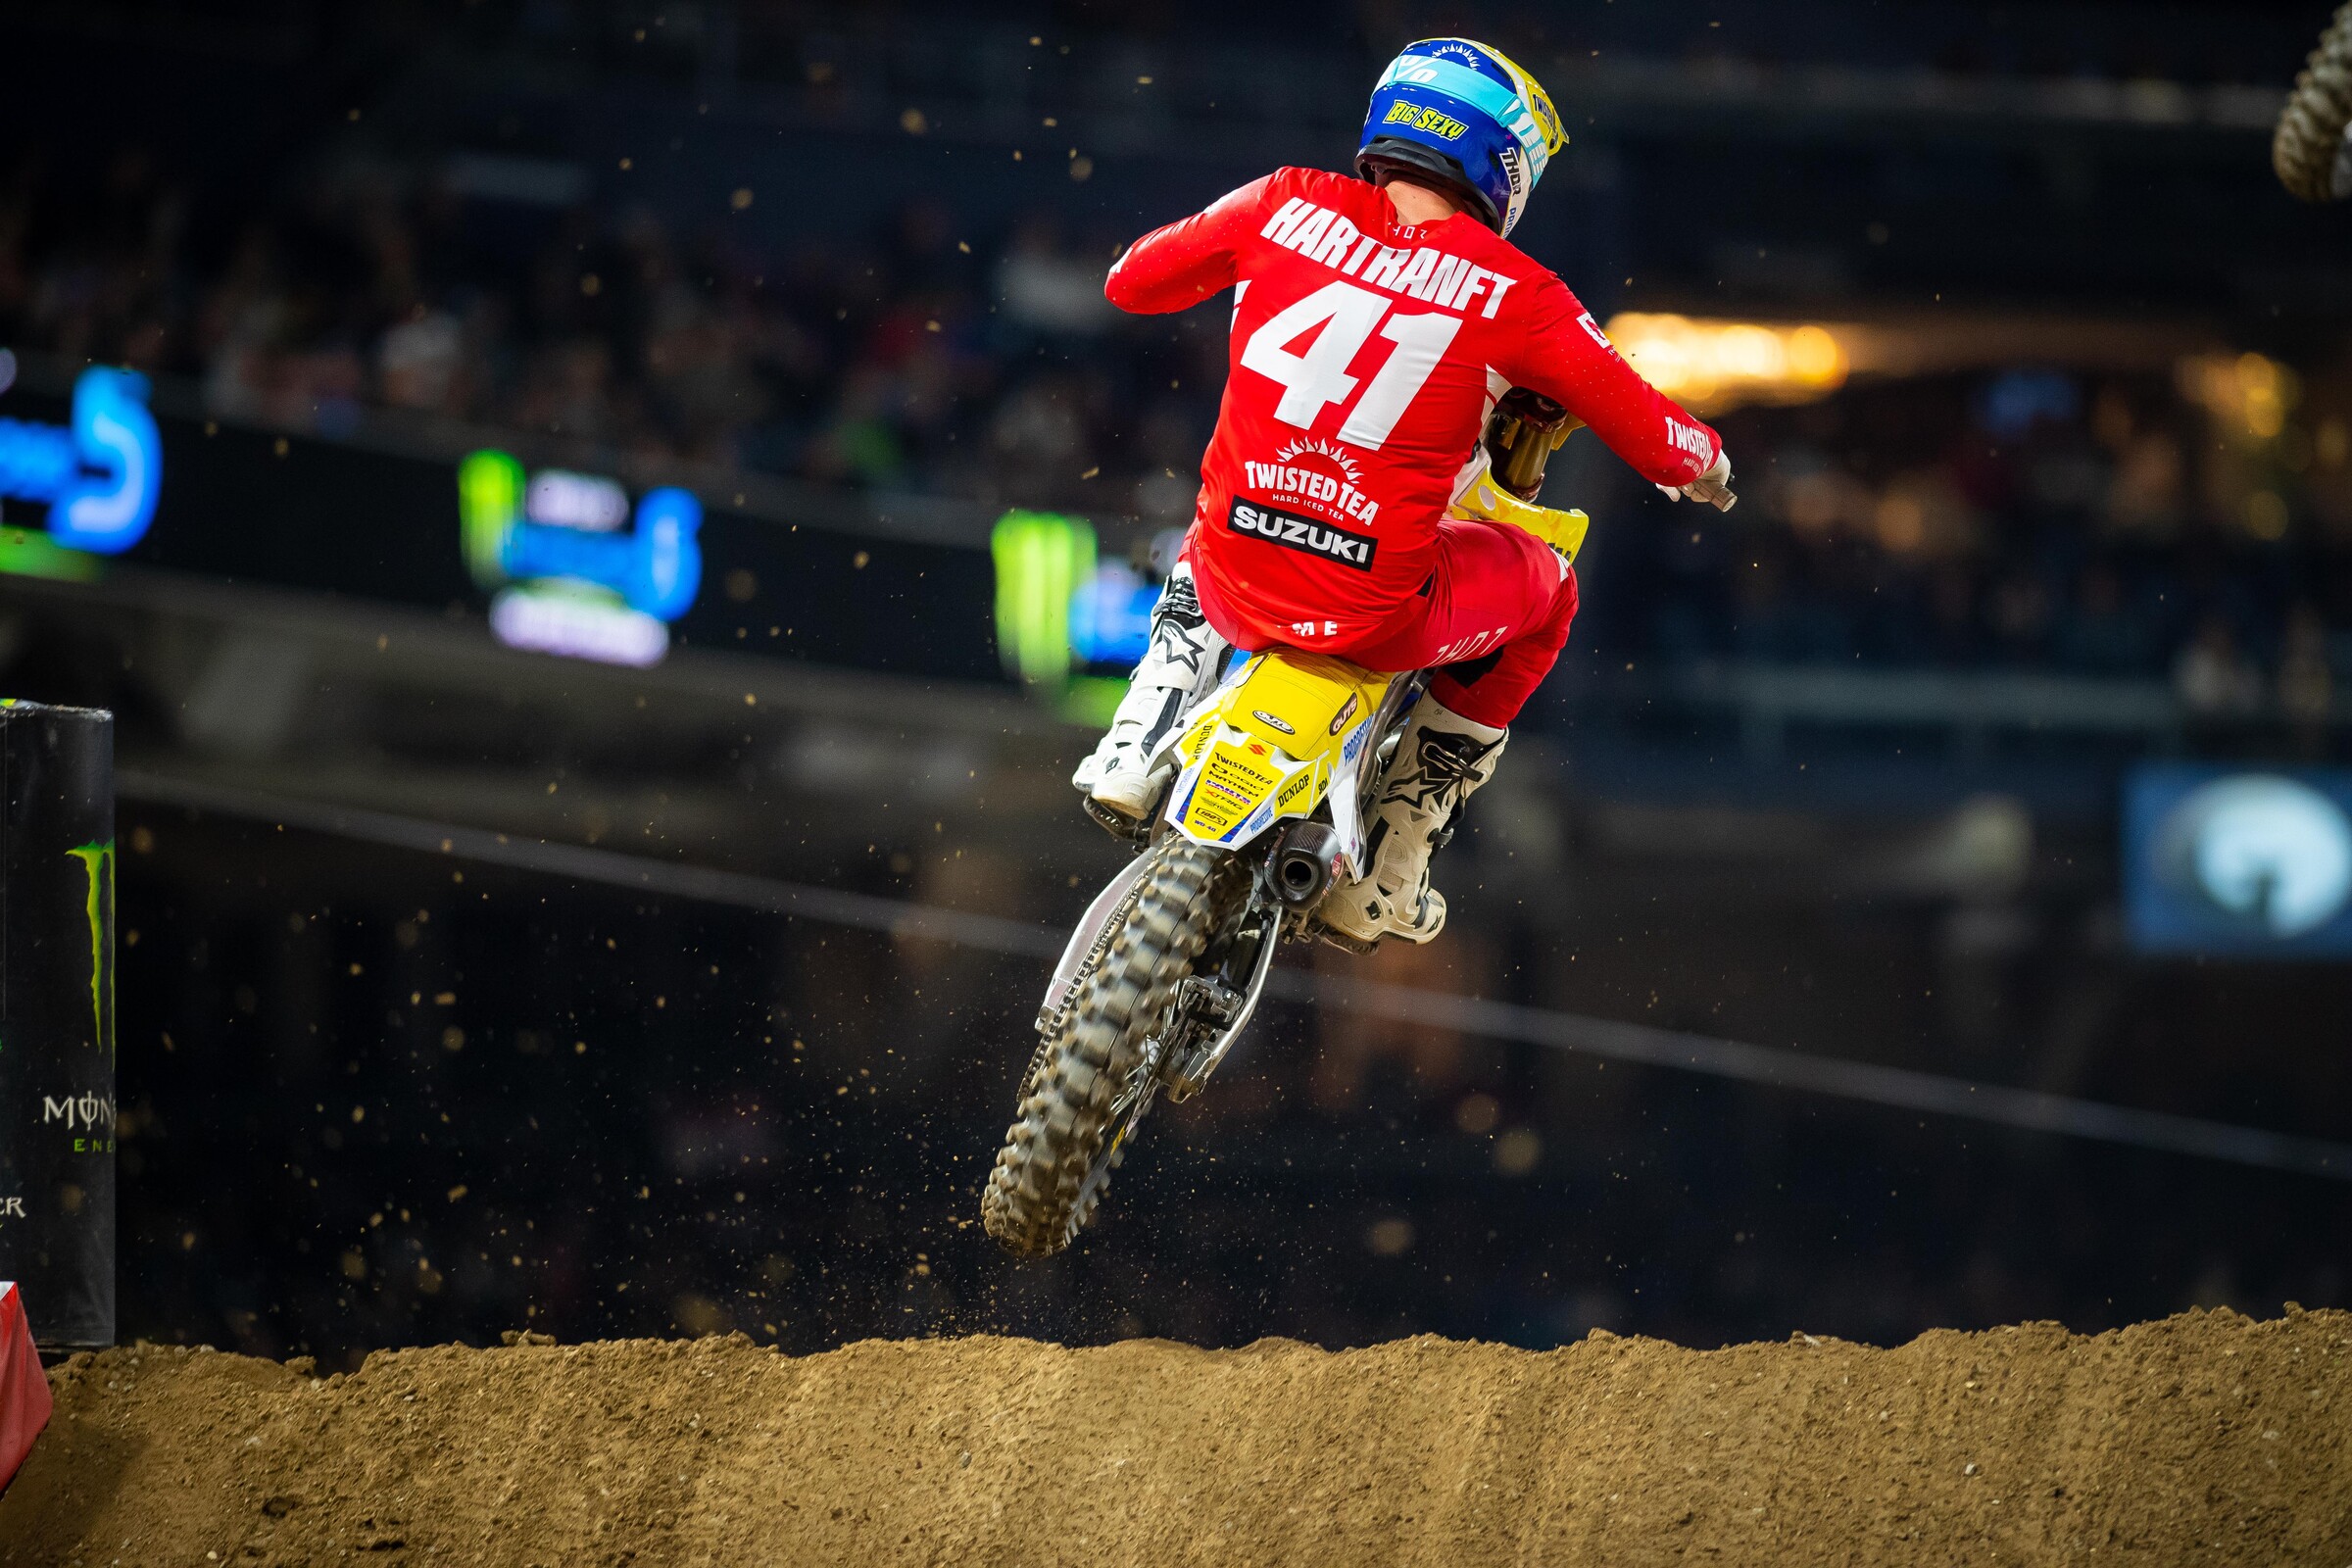 Steve Matthes Observations from 2022 San Diego Supercross